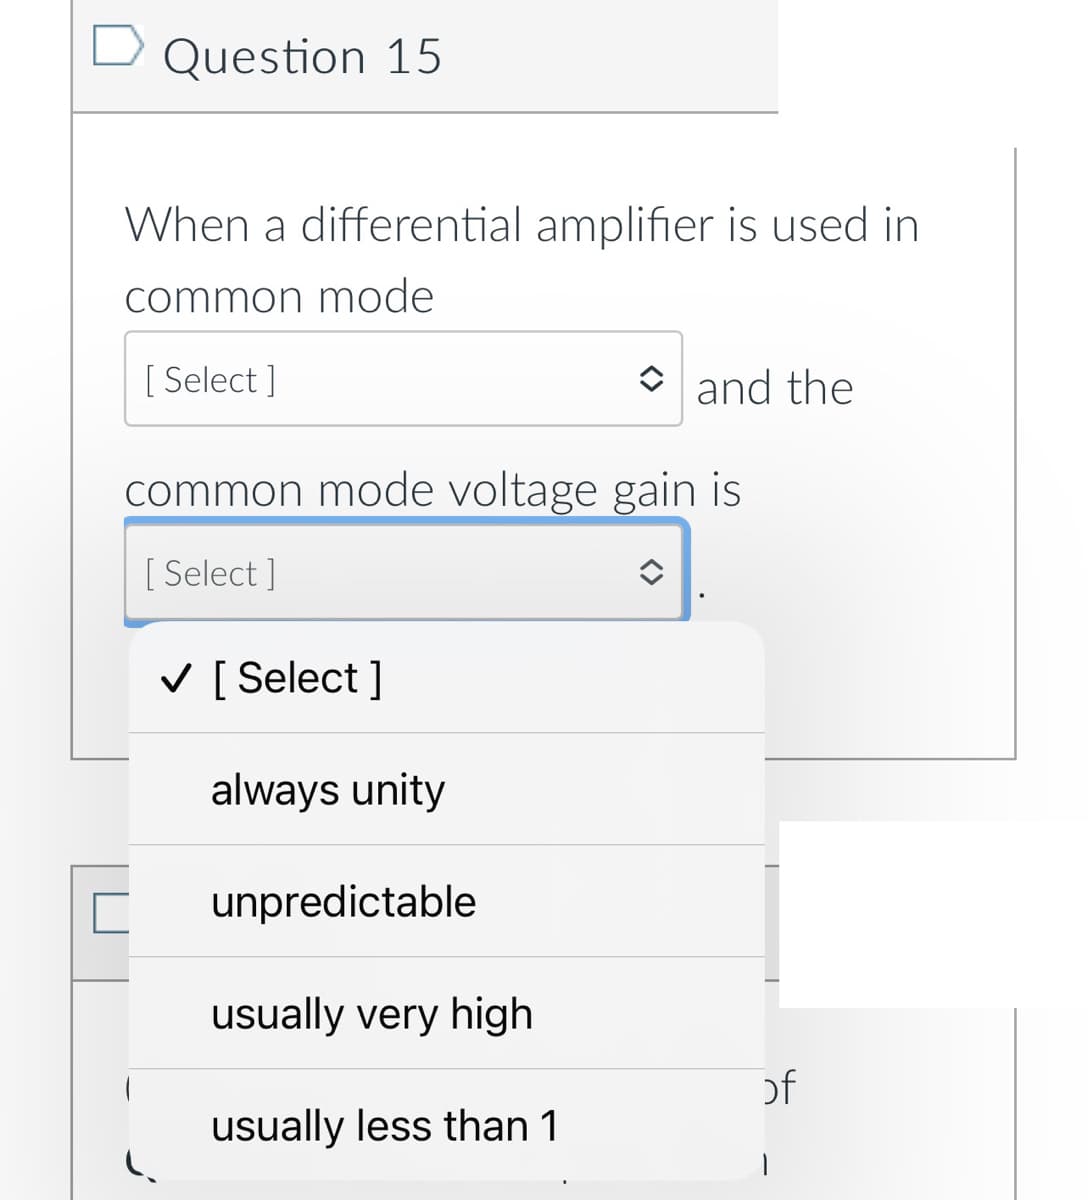 D Question 15
When a differential amplifier is used in
common mode
[ Select ]
O and the
common mode voltage gain is
[ Select ]
V [ Select ]
always unity
unpredictable
usually very high
of
usually less than 1
